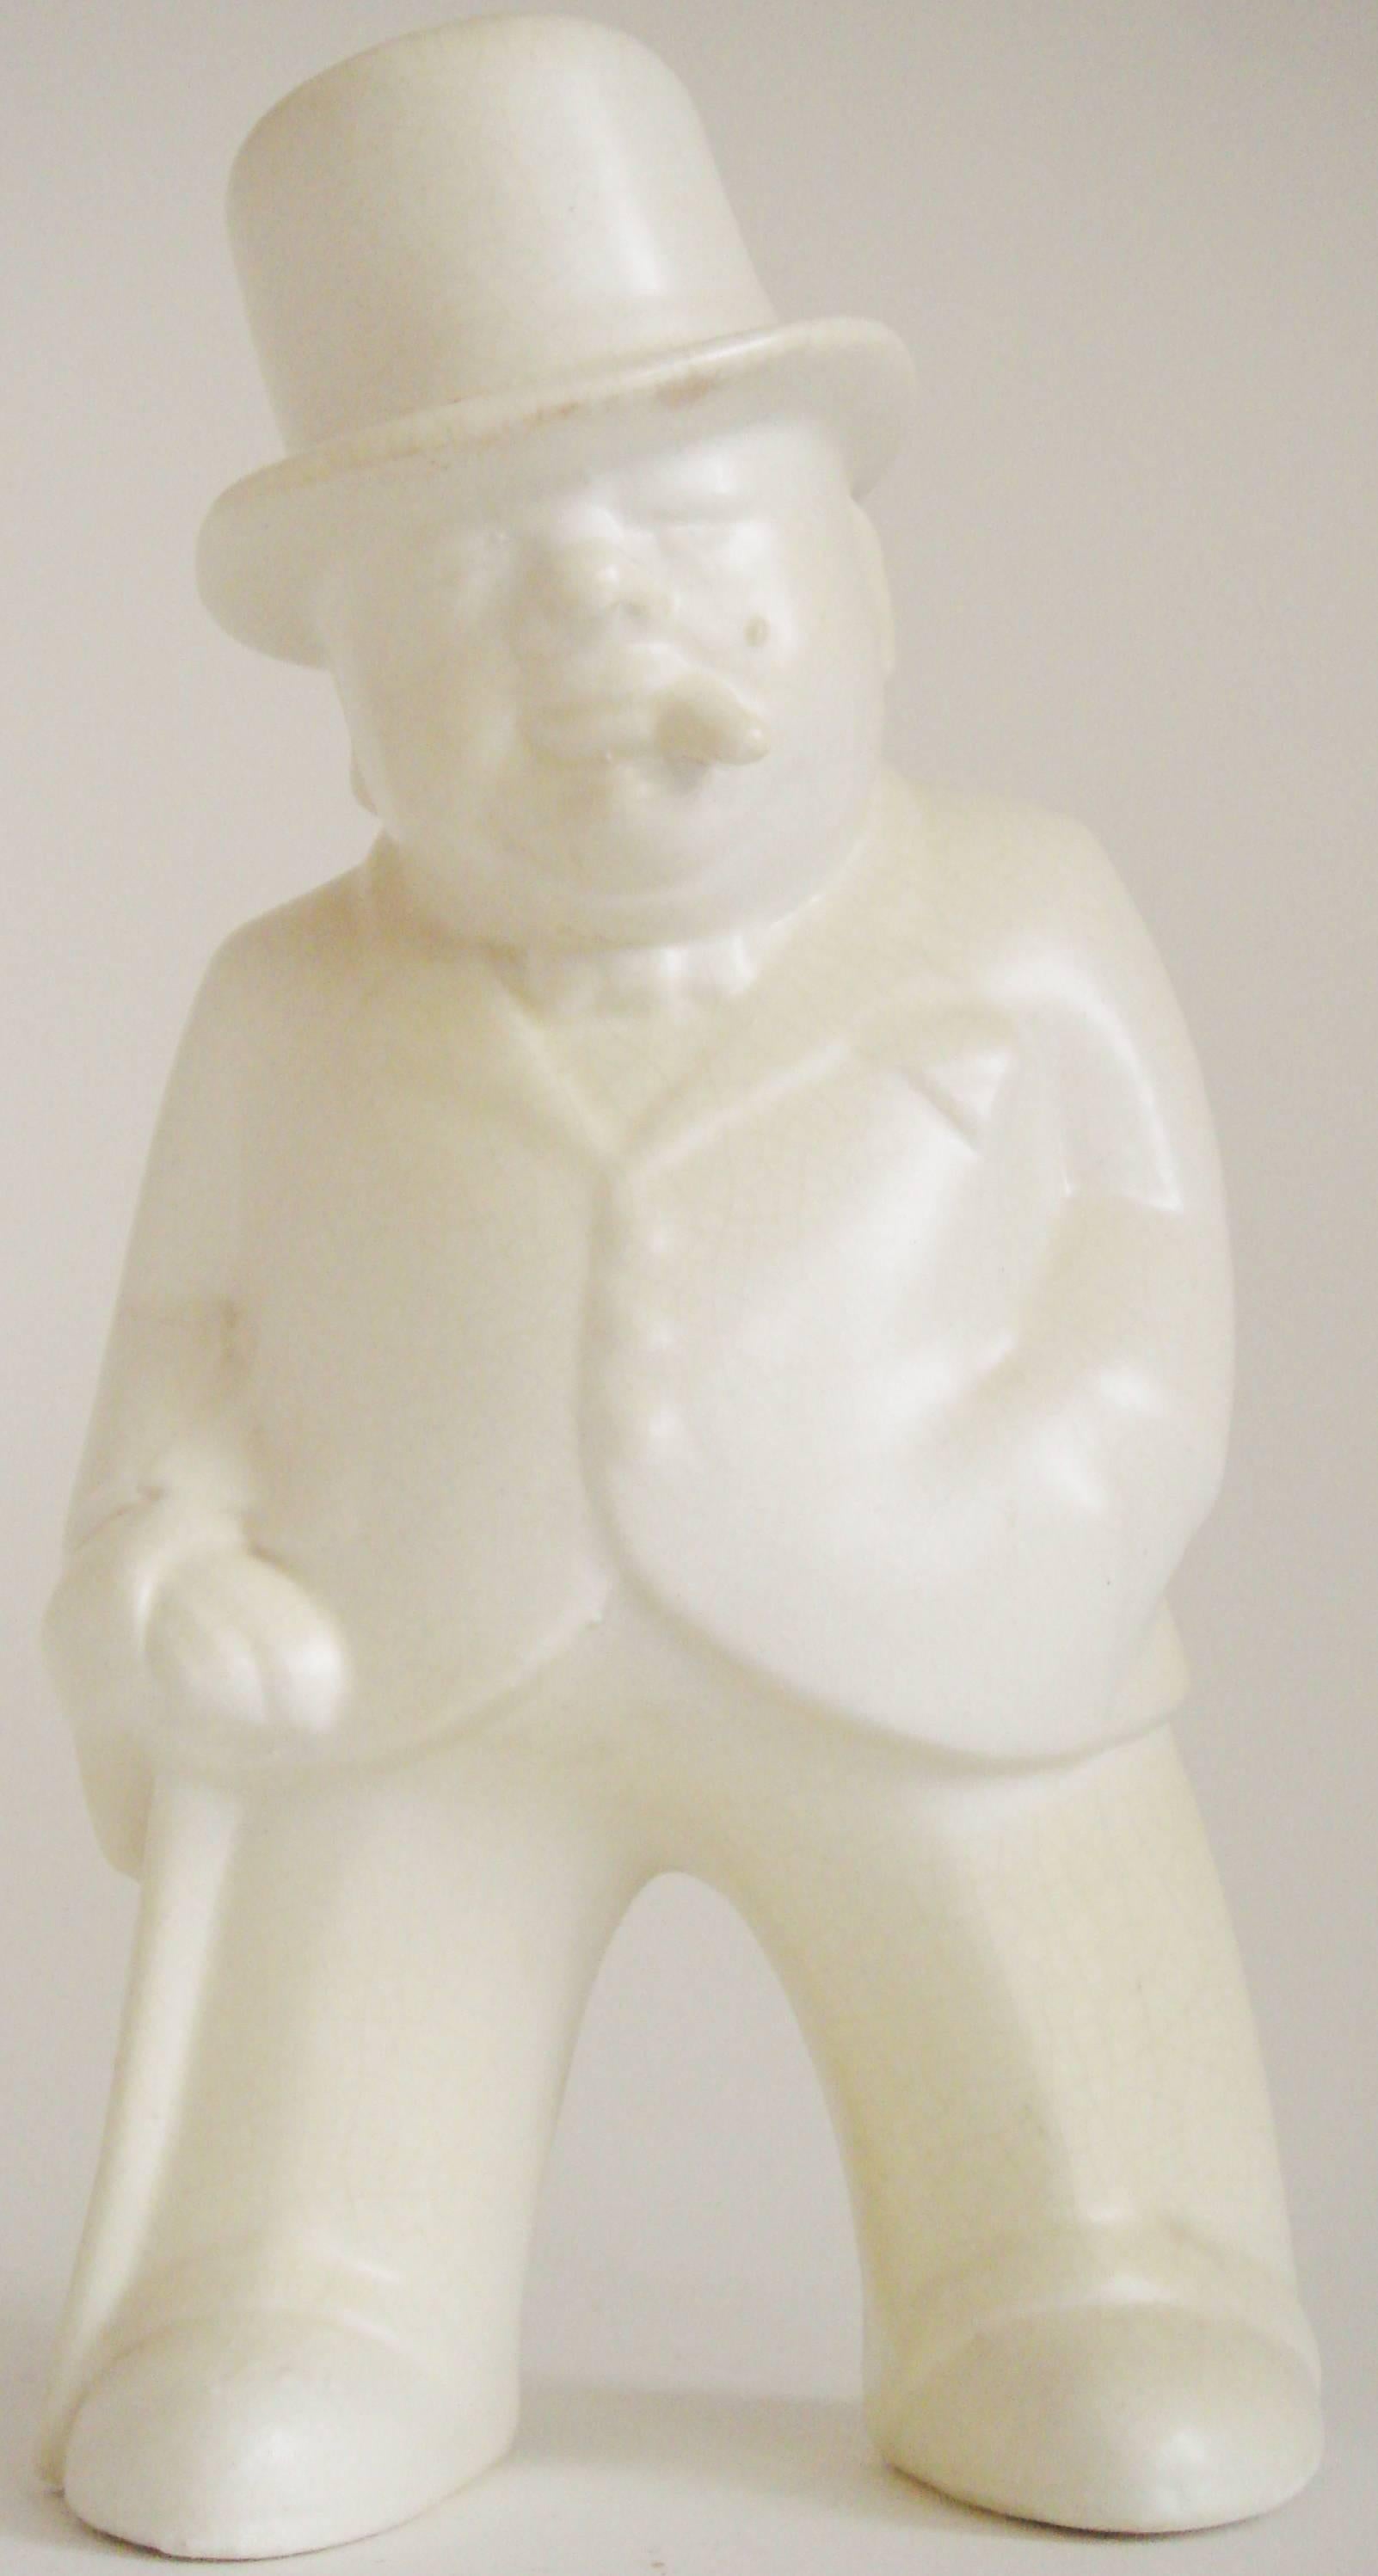 This English Art Deco ceramic caricature figure of Winston Churchill is known as 